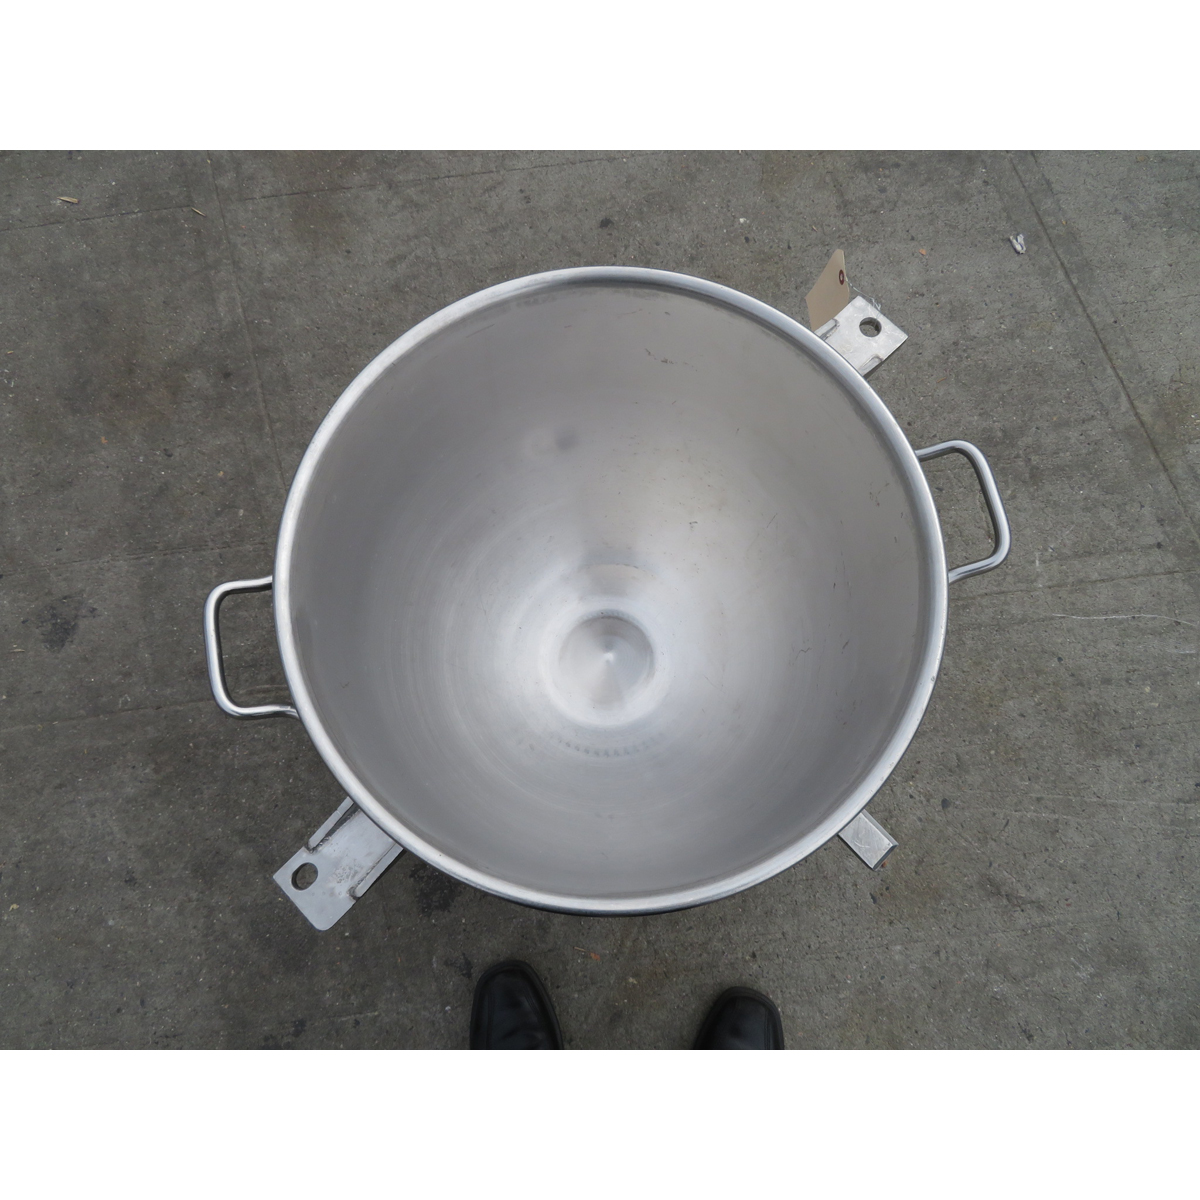 Hobart Legacy BOWL-HL80 80 Qt. Stainless Steel Bowl for HL800 Mixer, Used Excellent Condition image 2